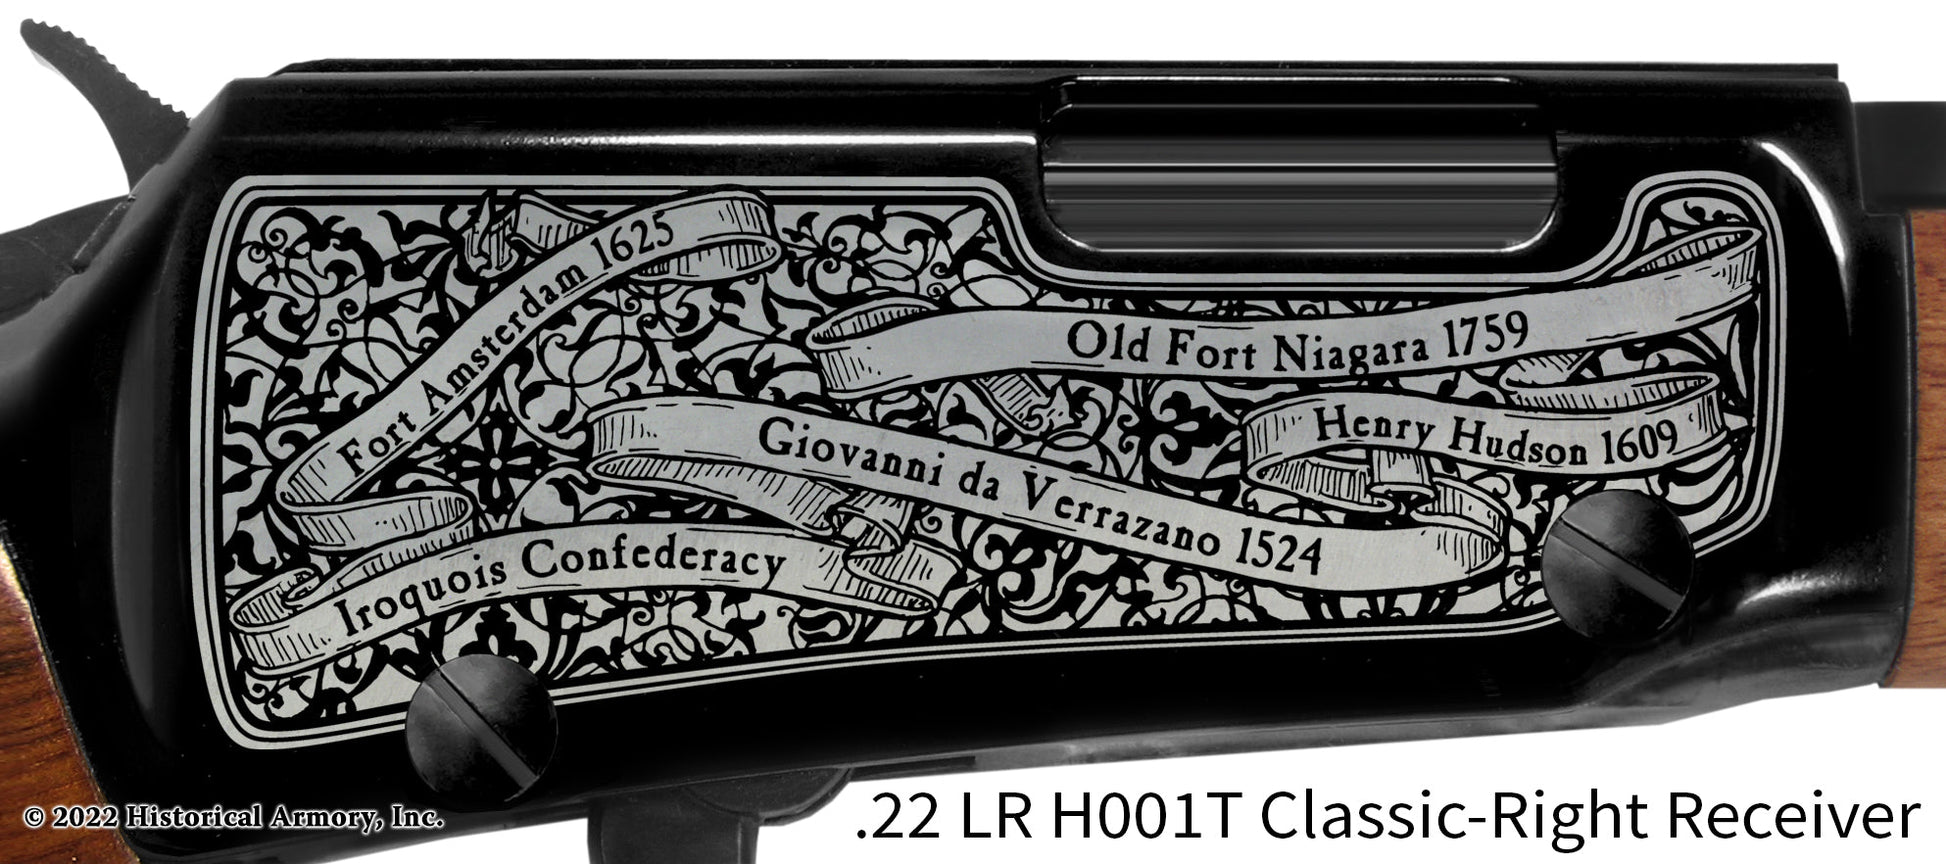 New York State Pride Engraved H00T Receiver detail Henry Rifle